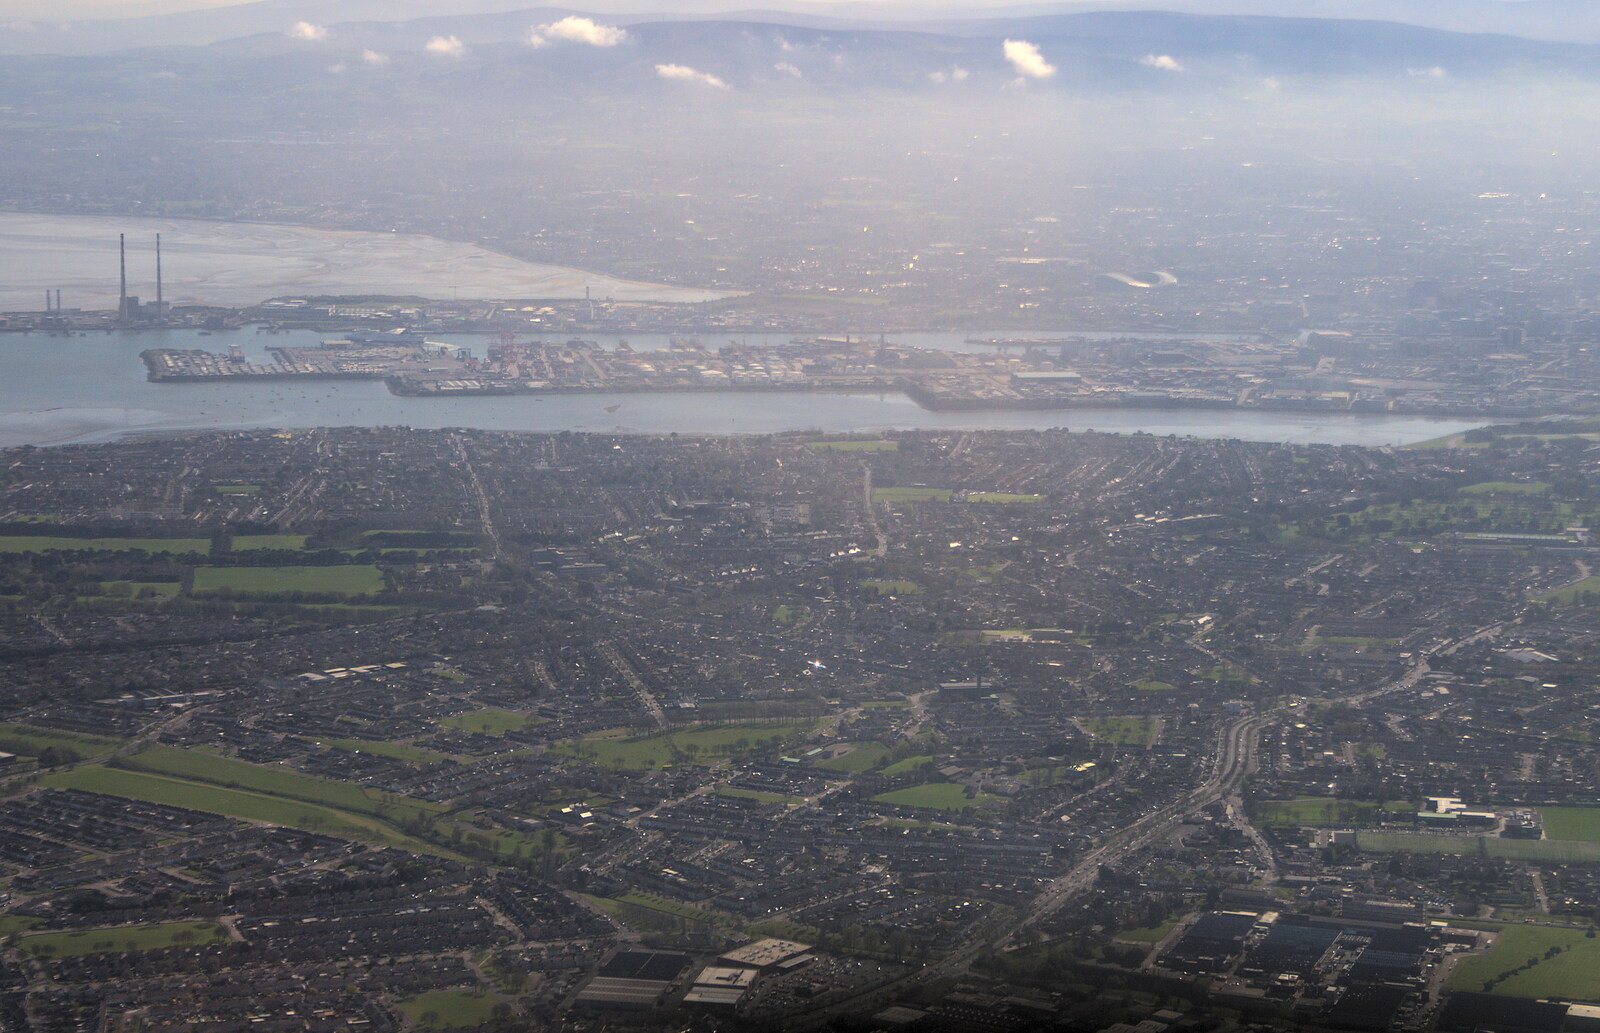 Dublin Bay after take off from Temple Bar and Dun Laoghaire, Dublin, Ireland - 16th April 2015